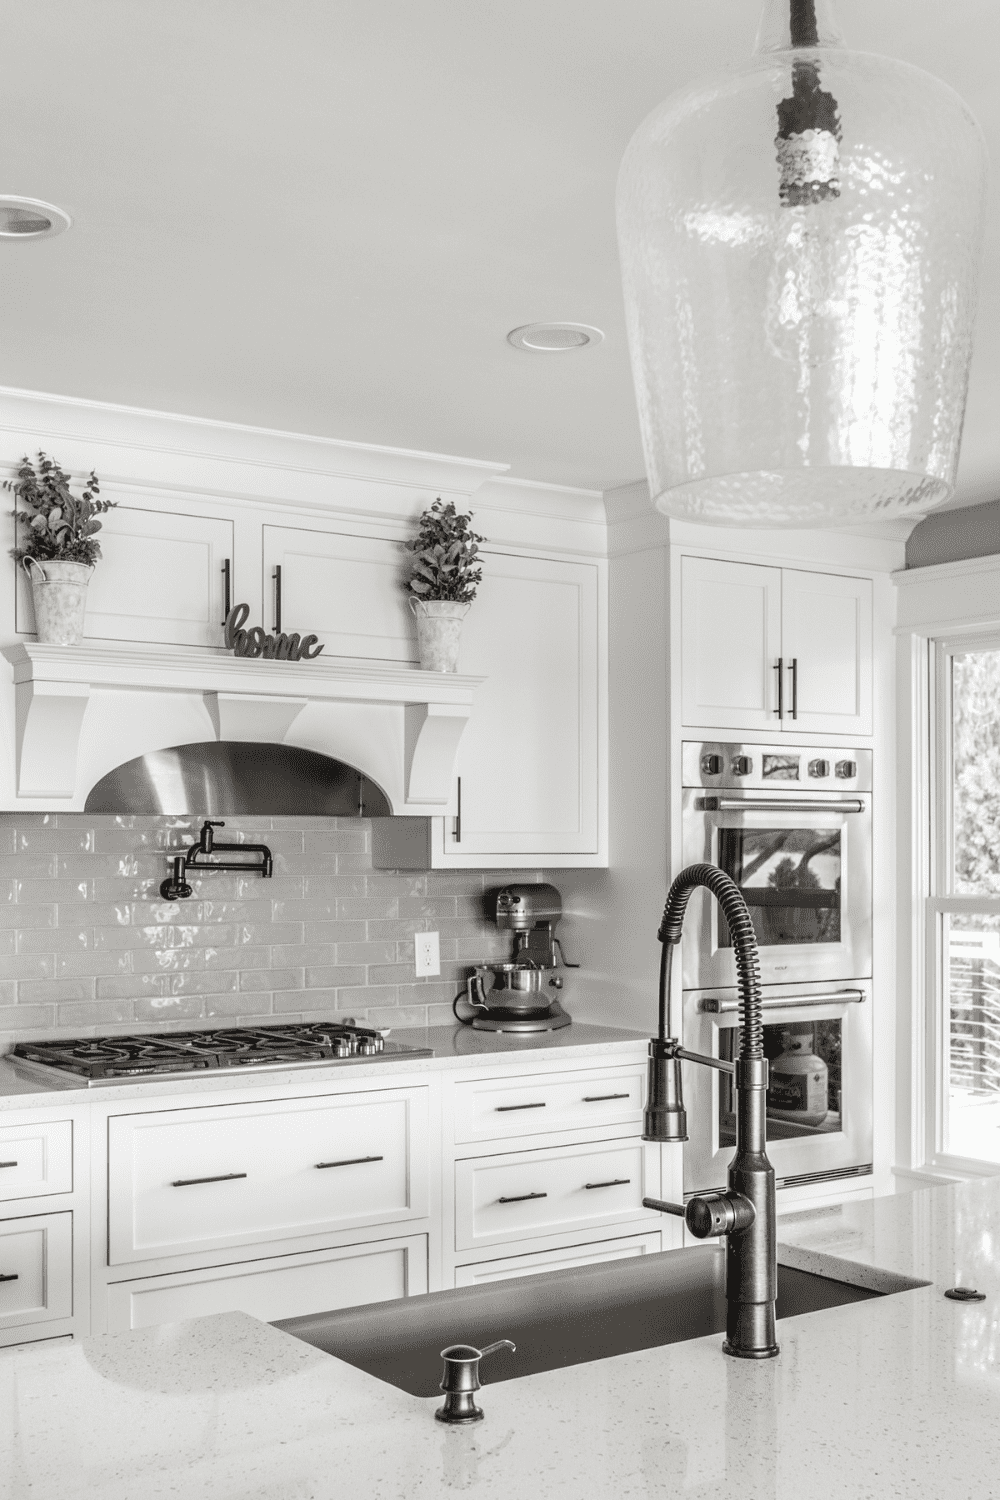 Nicholas Design Build | A black and white photo of a kitchen with white cabinets.